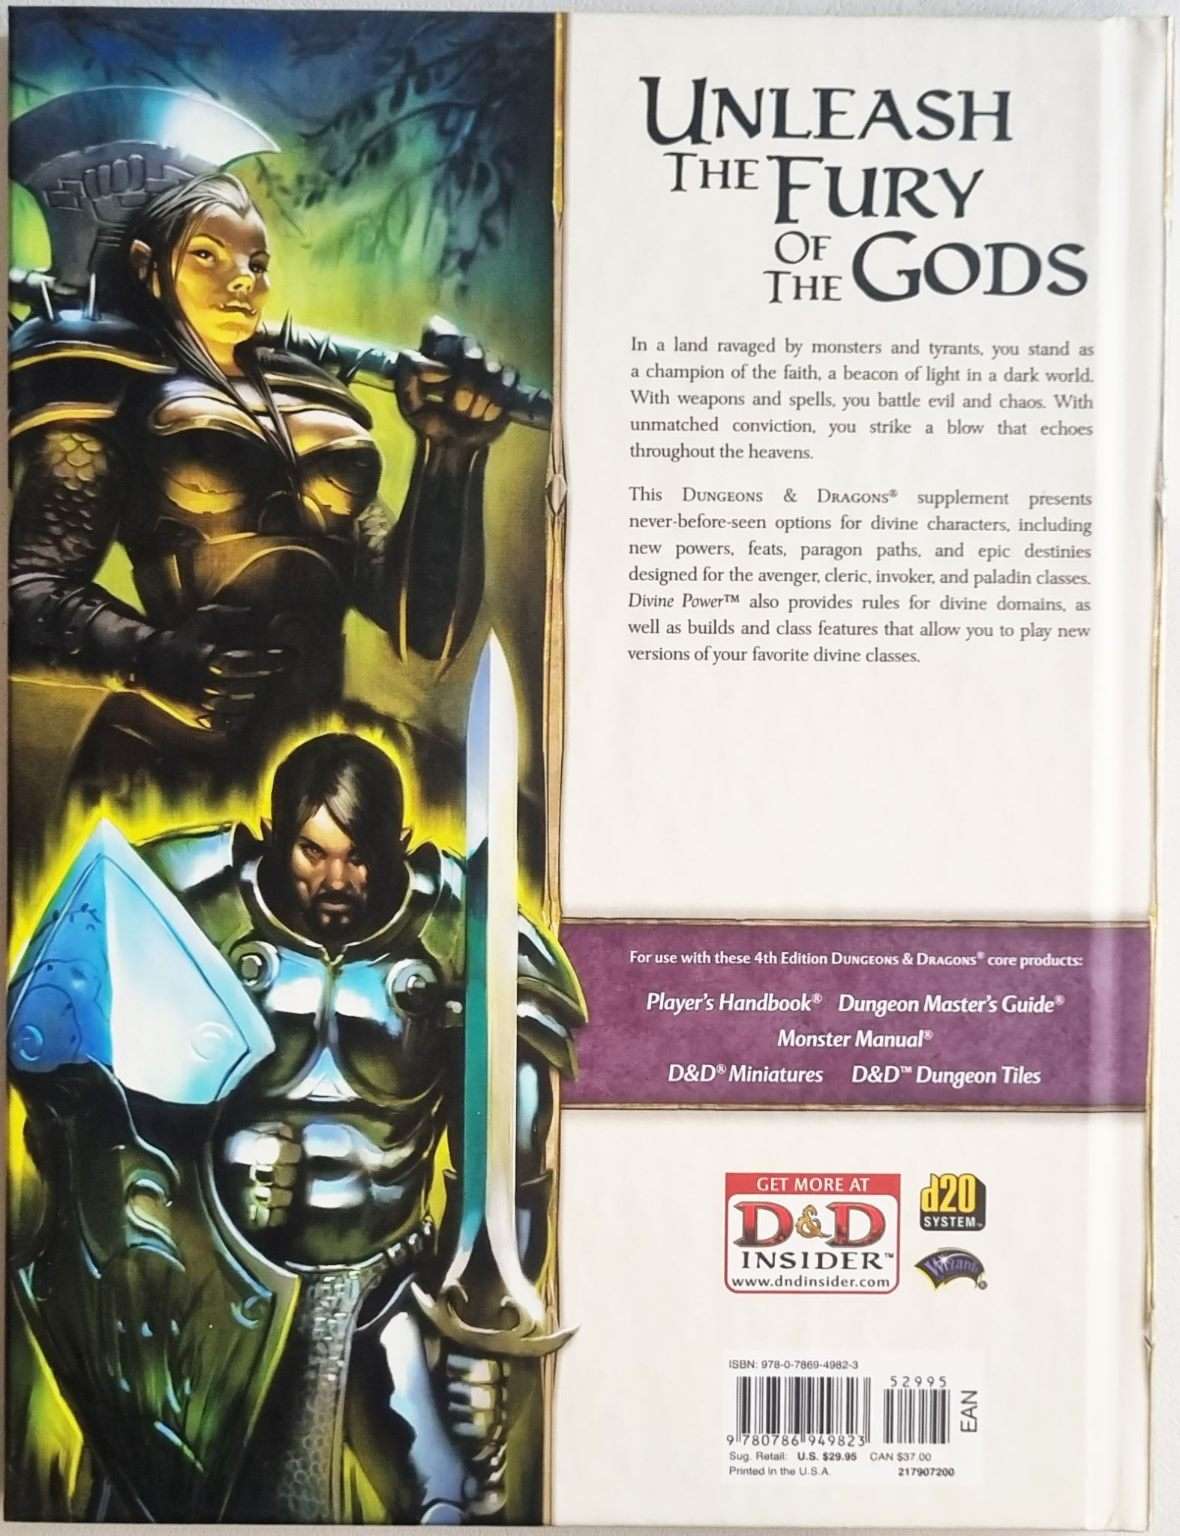 Dungeons and Dragons - Divine Power (4e) Default Title